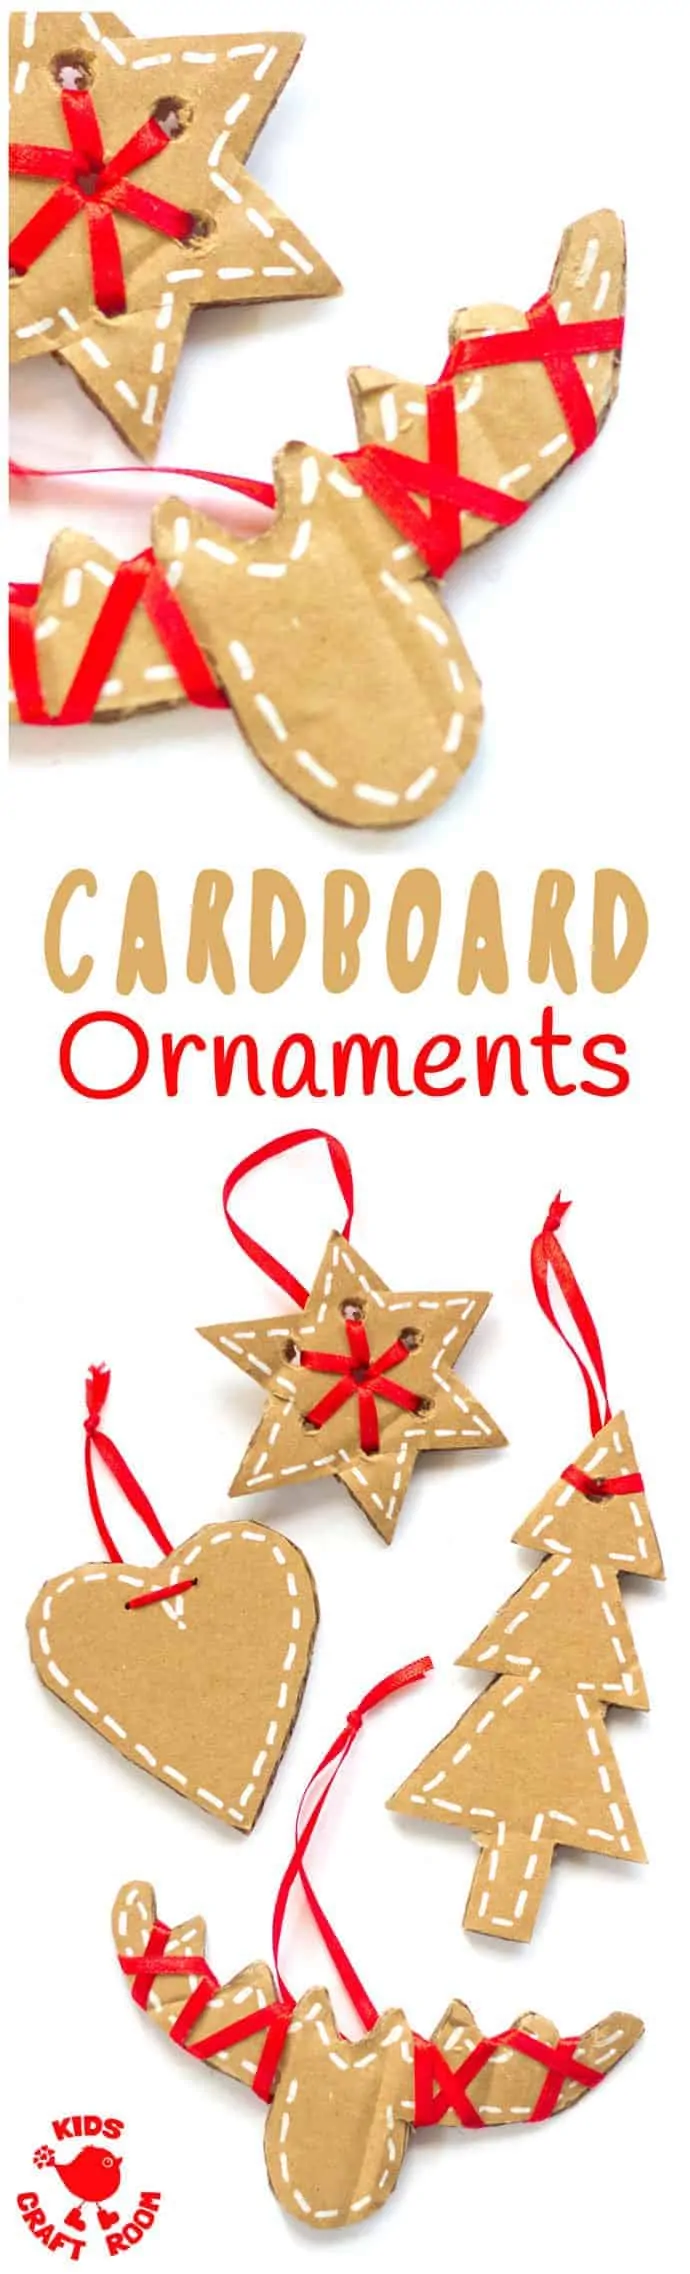 PRETTY CARDBOARD ORNAMENTS - These rustic DIY cardboard ornaments are a fantastic recycled crafts that will make your Christmas tree and home gorgeous this Winter. A simple Christmas craft for kids and adults. #christmas #christmascrafts #kidscrafts #recycledcrafts #ornaments #kidscraftroom #cardboard #recycled 